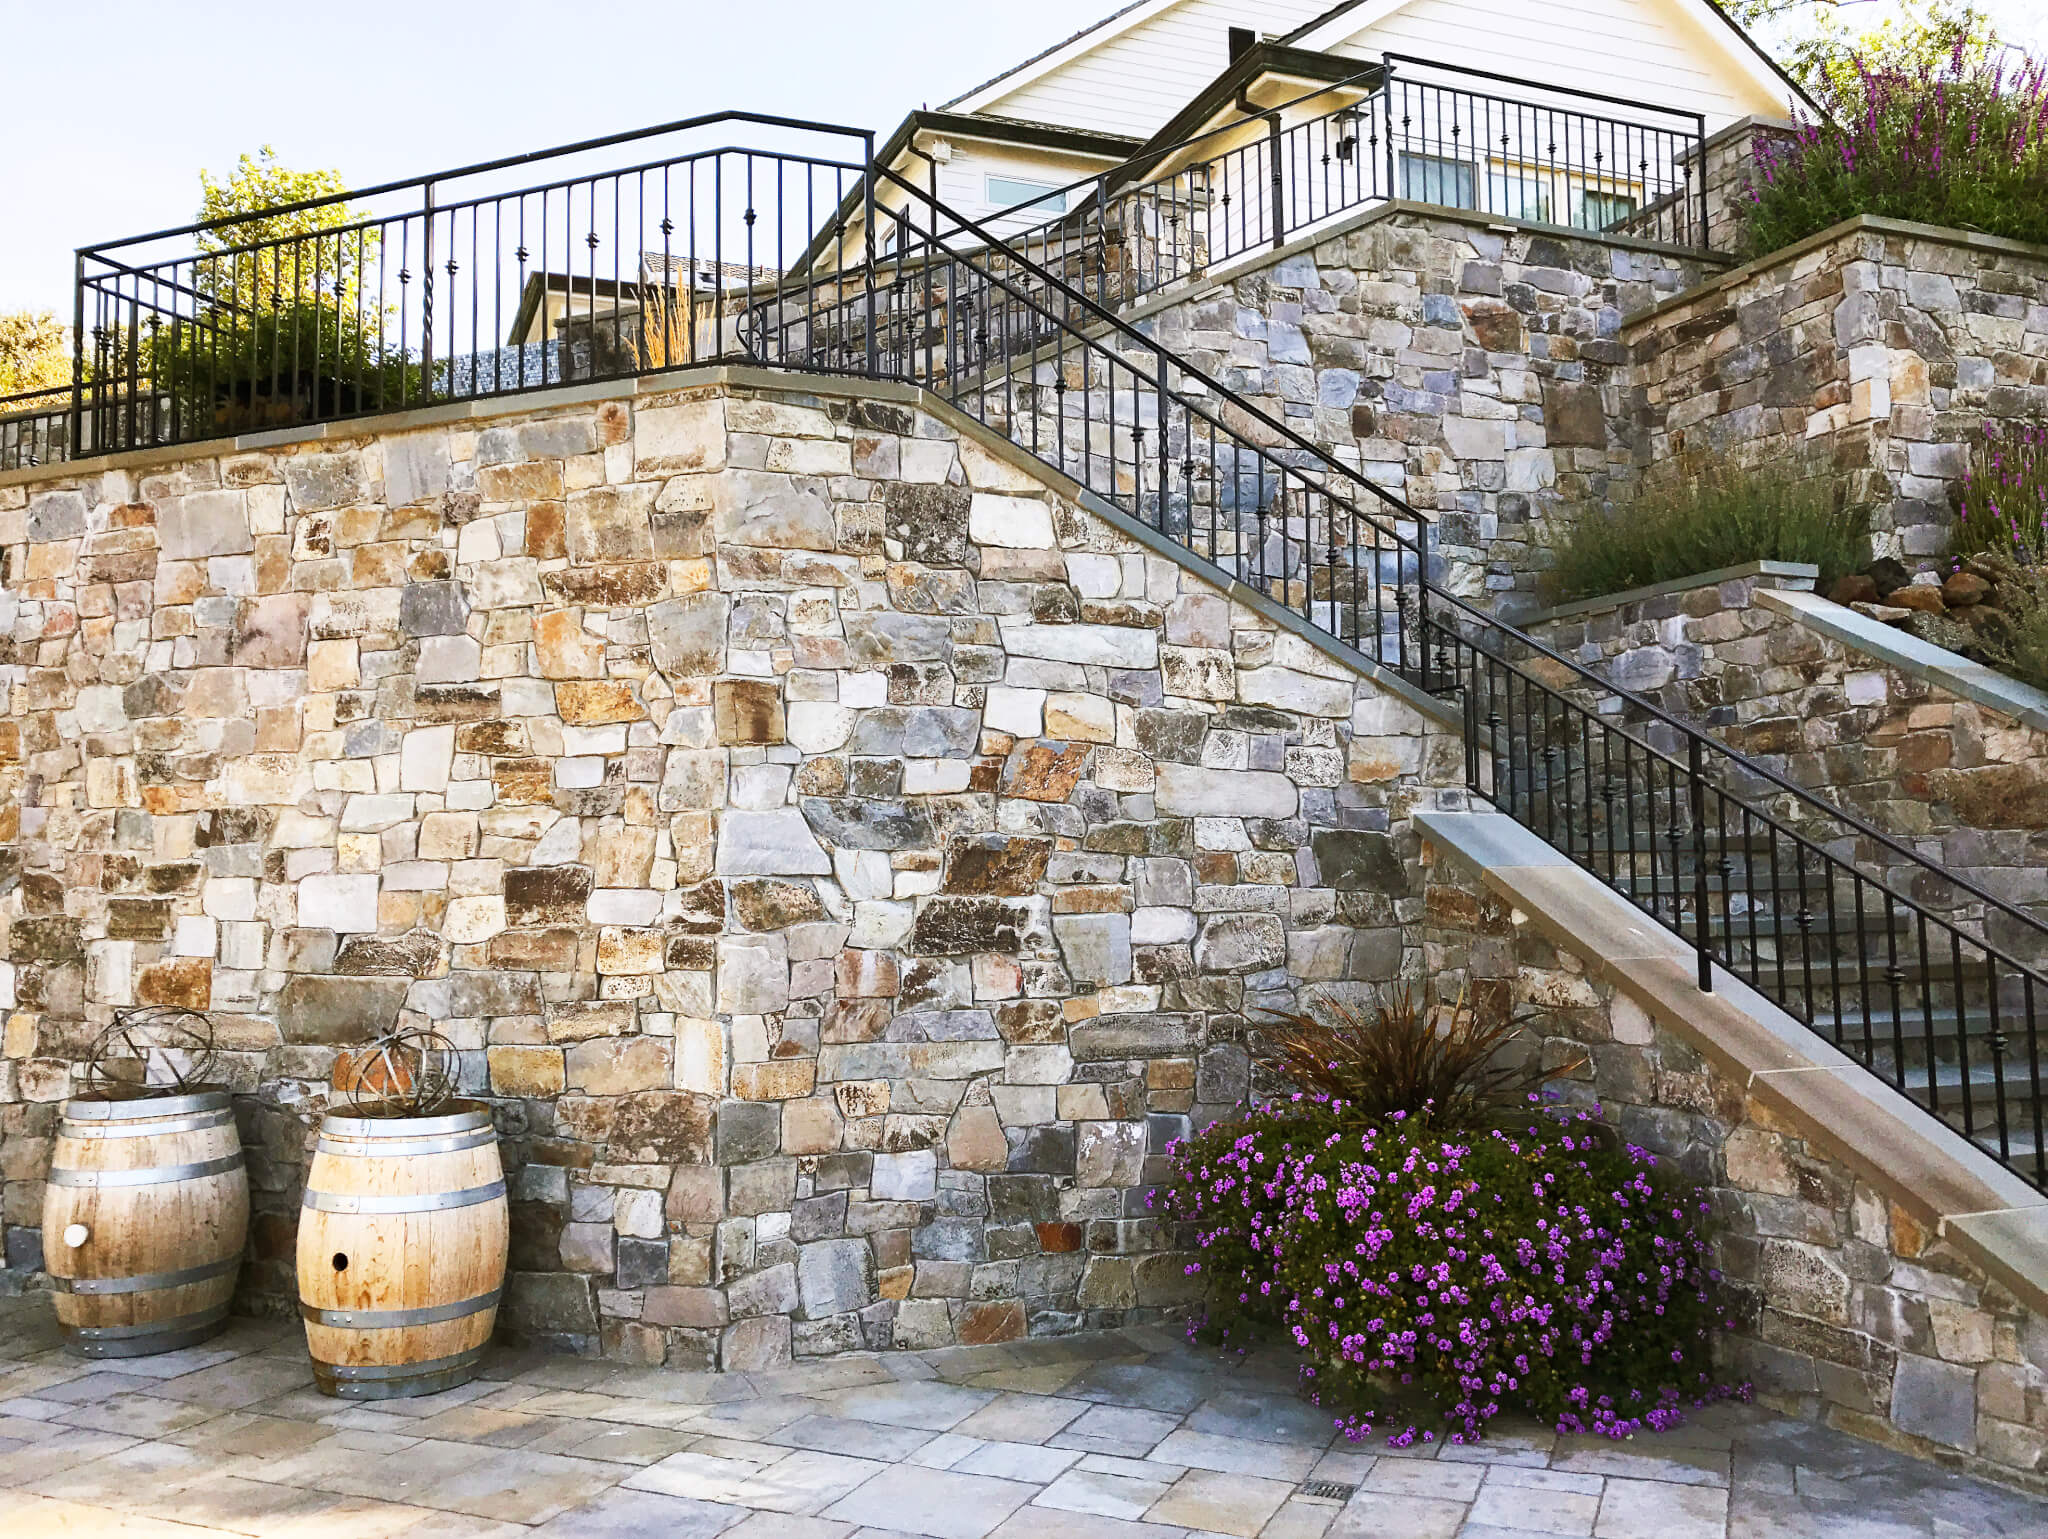 Wrought iron stair railing on stone walled staircase wrapping up two levels